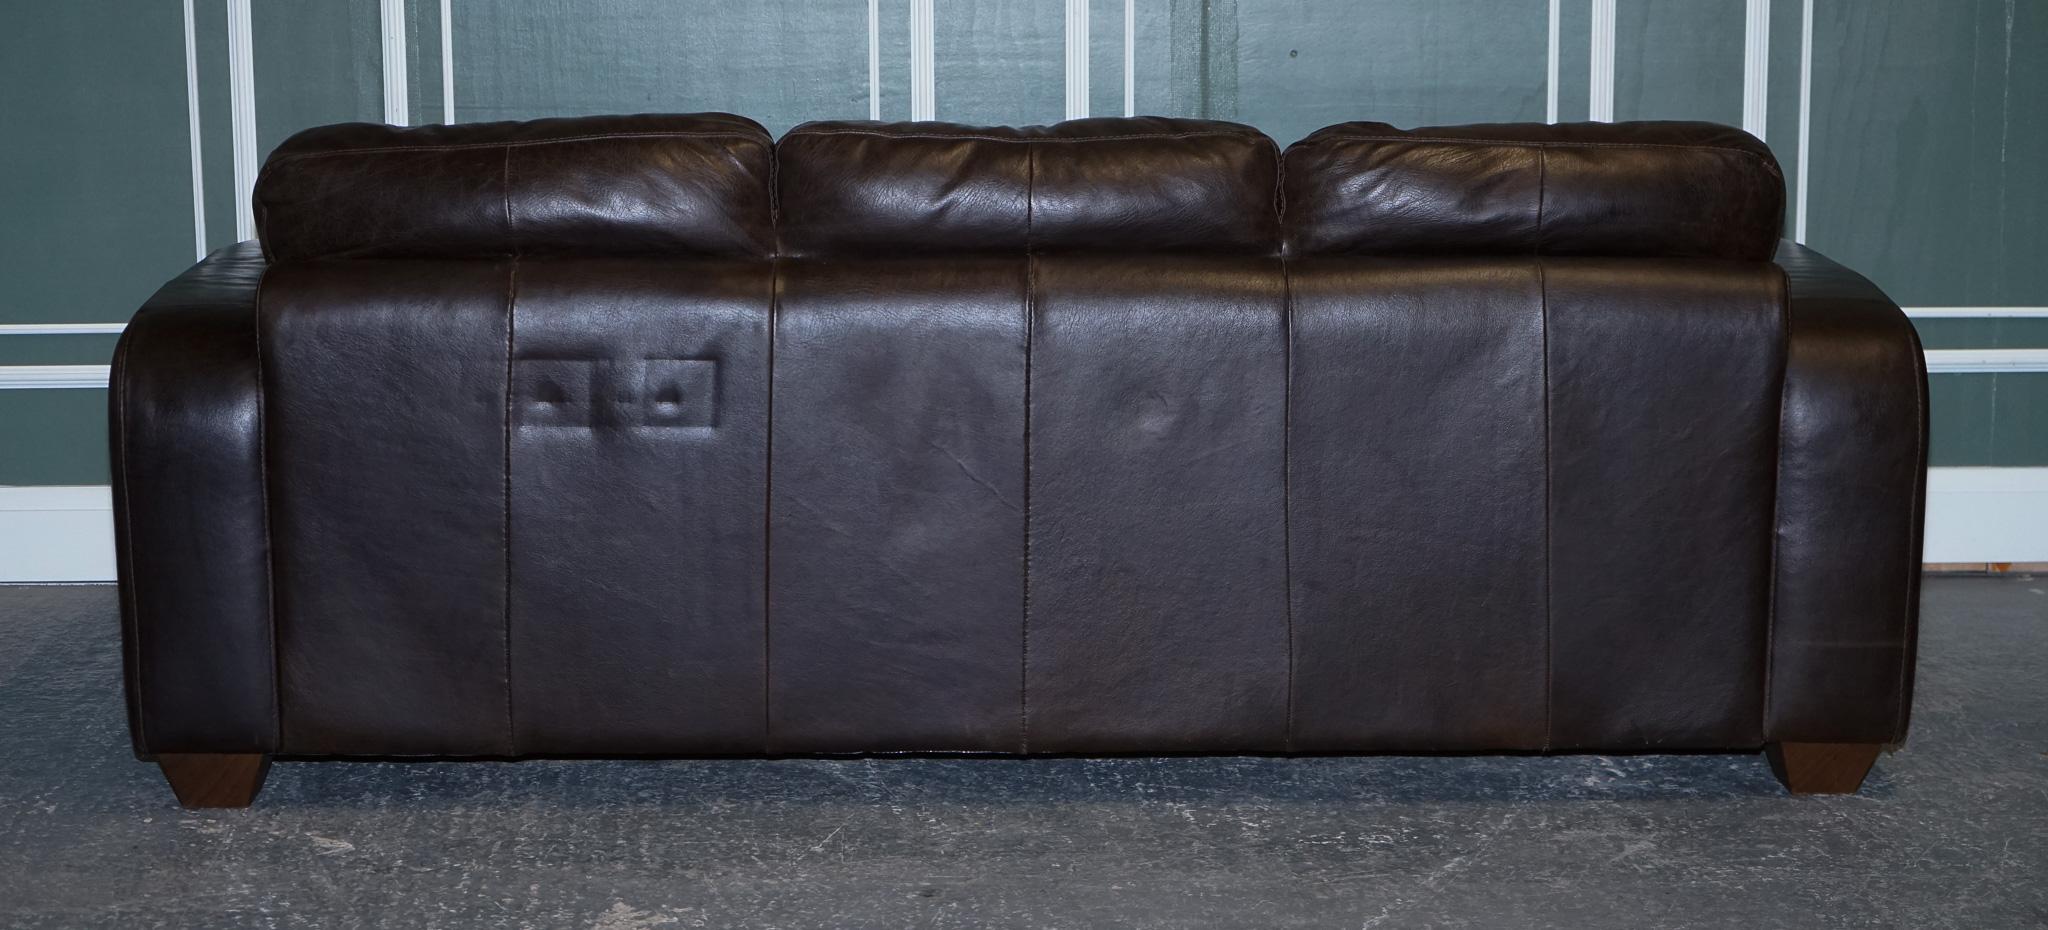 STUNNING VINTAGE CHOCOLATE BROWN LEATHER THREE SEATER SOFA BY SOFITALiA For Sale 7